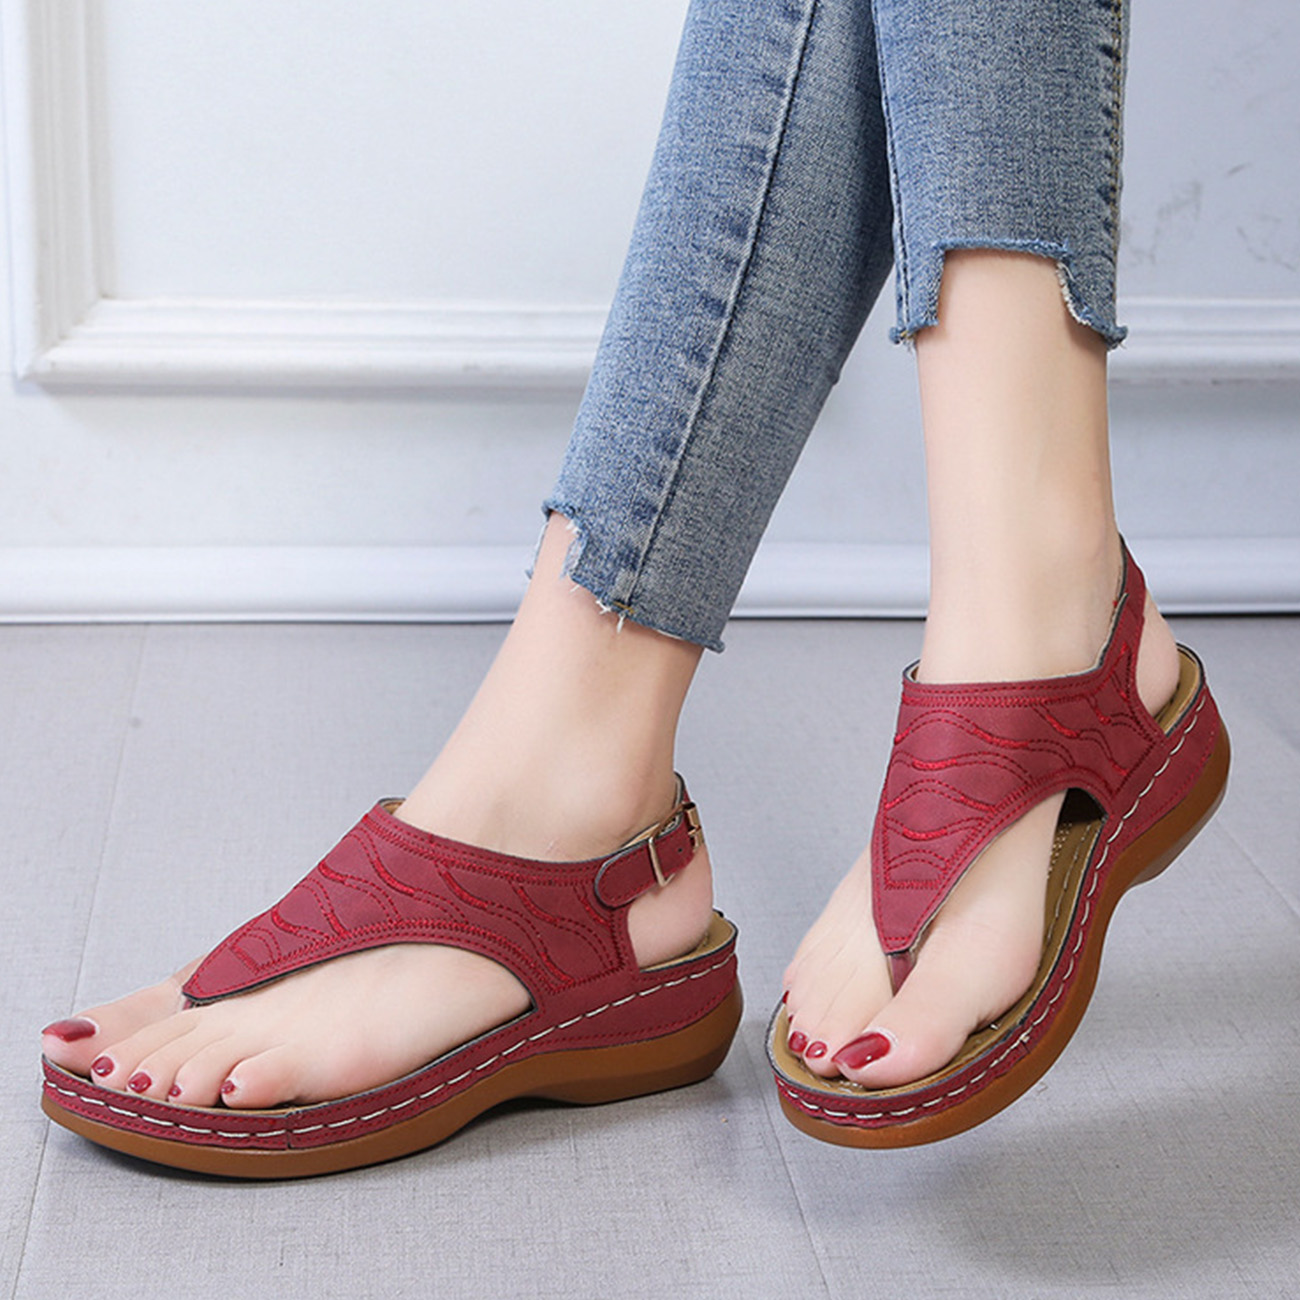 Embroidery Red Wedge Sandals.